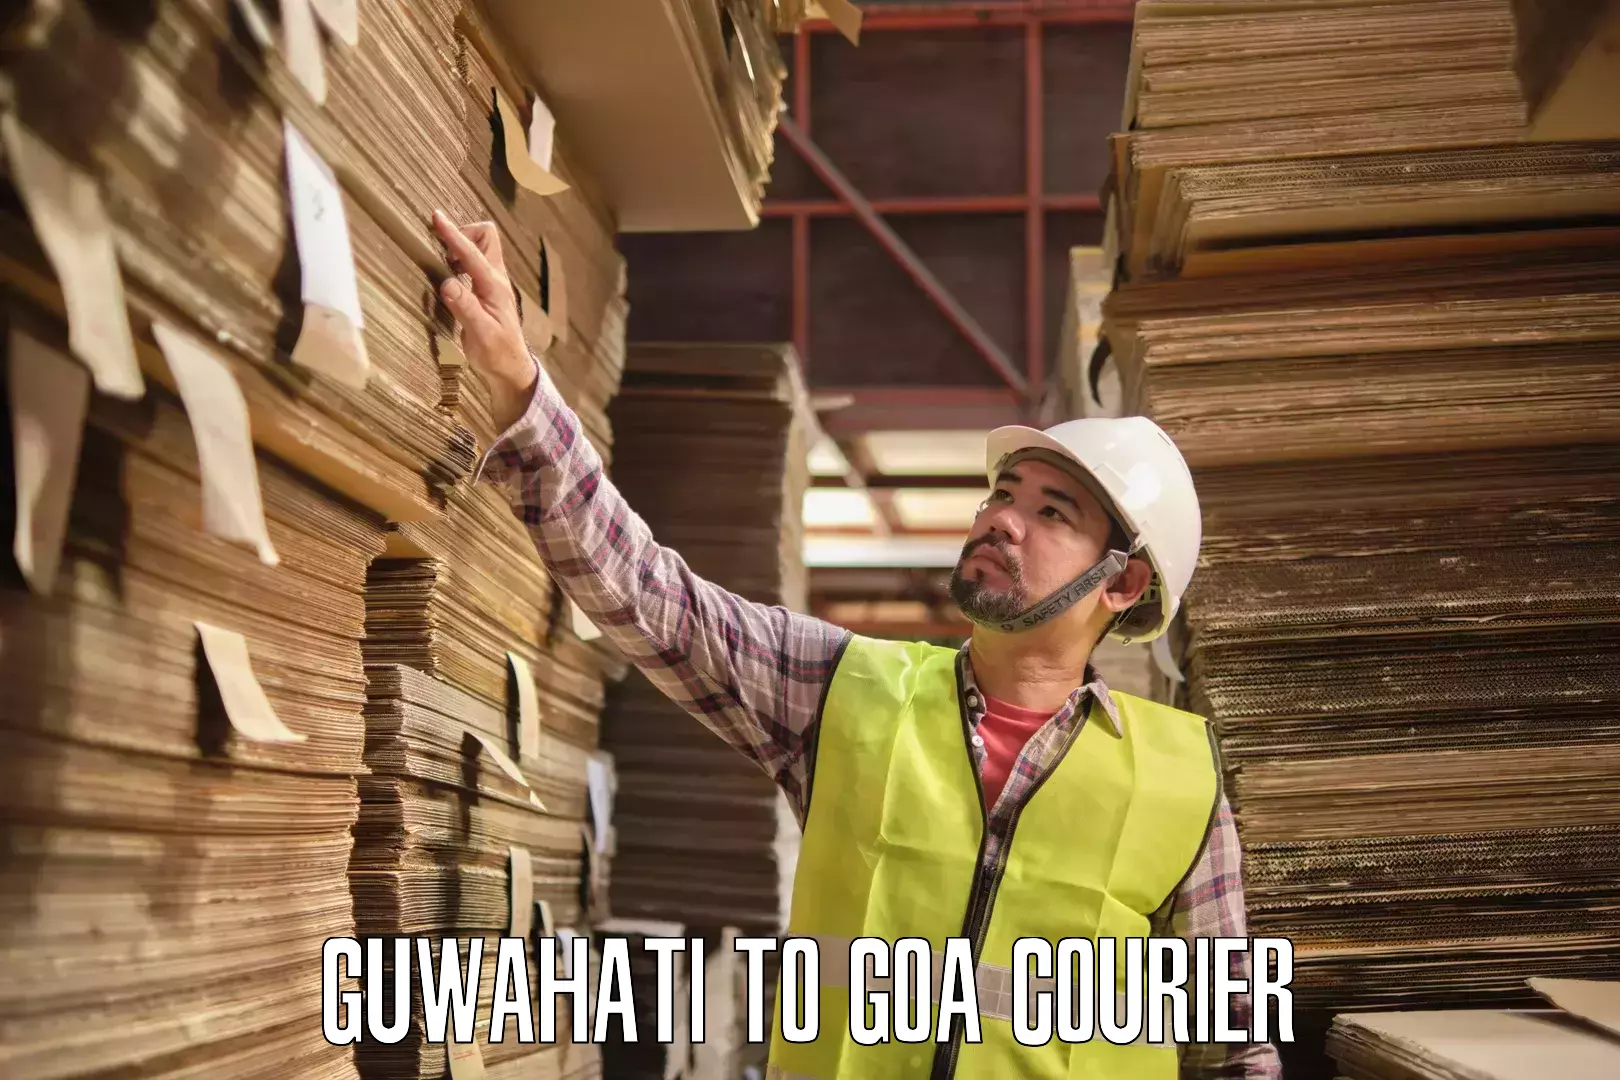 Residential courier service Guwahati to Goa